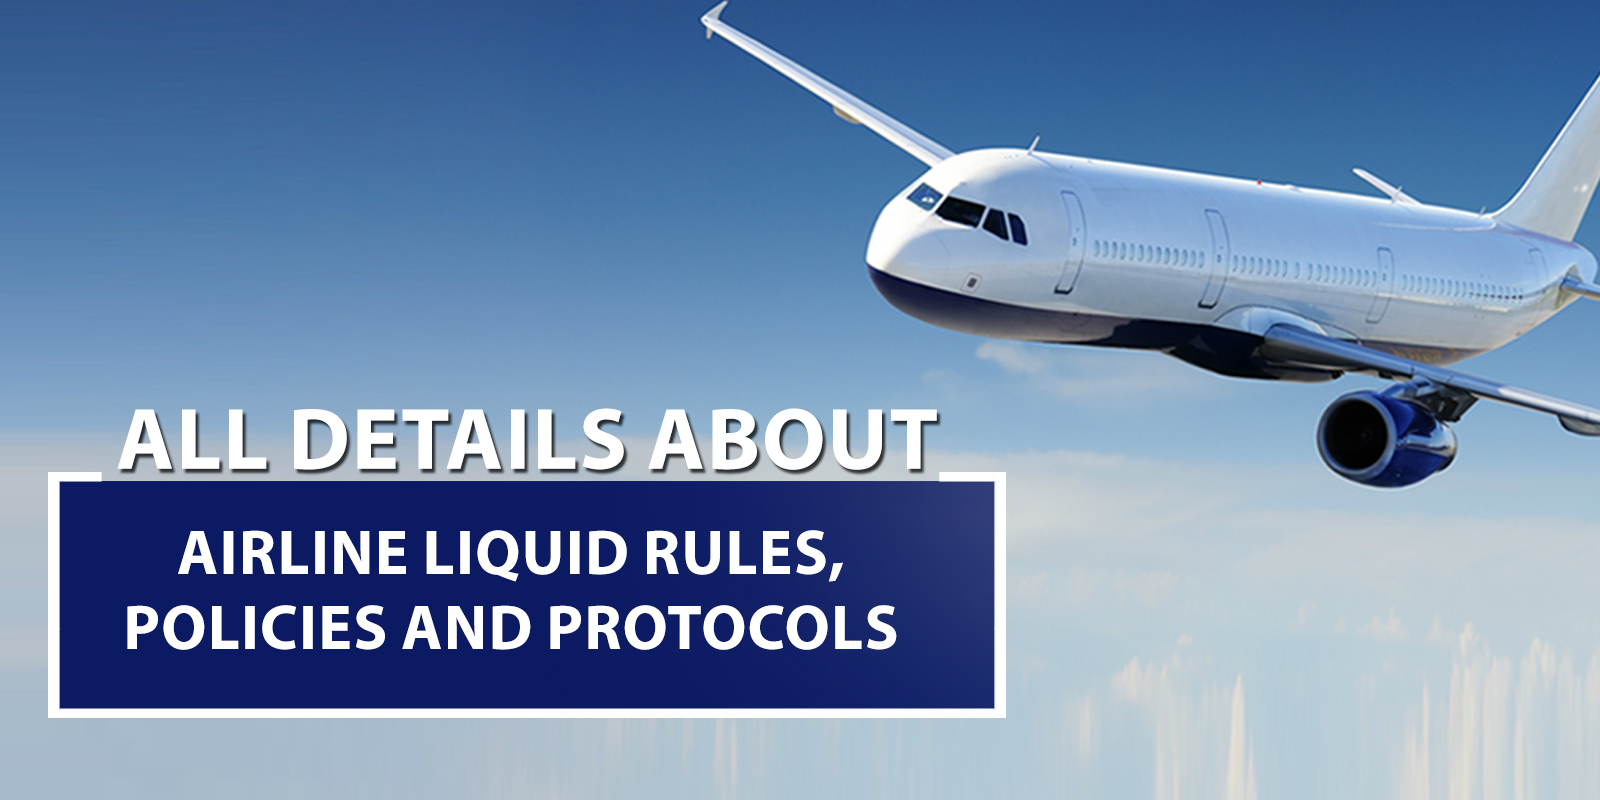 All Details About Airline Liquid Rules, Policies and Protocols